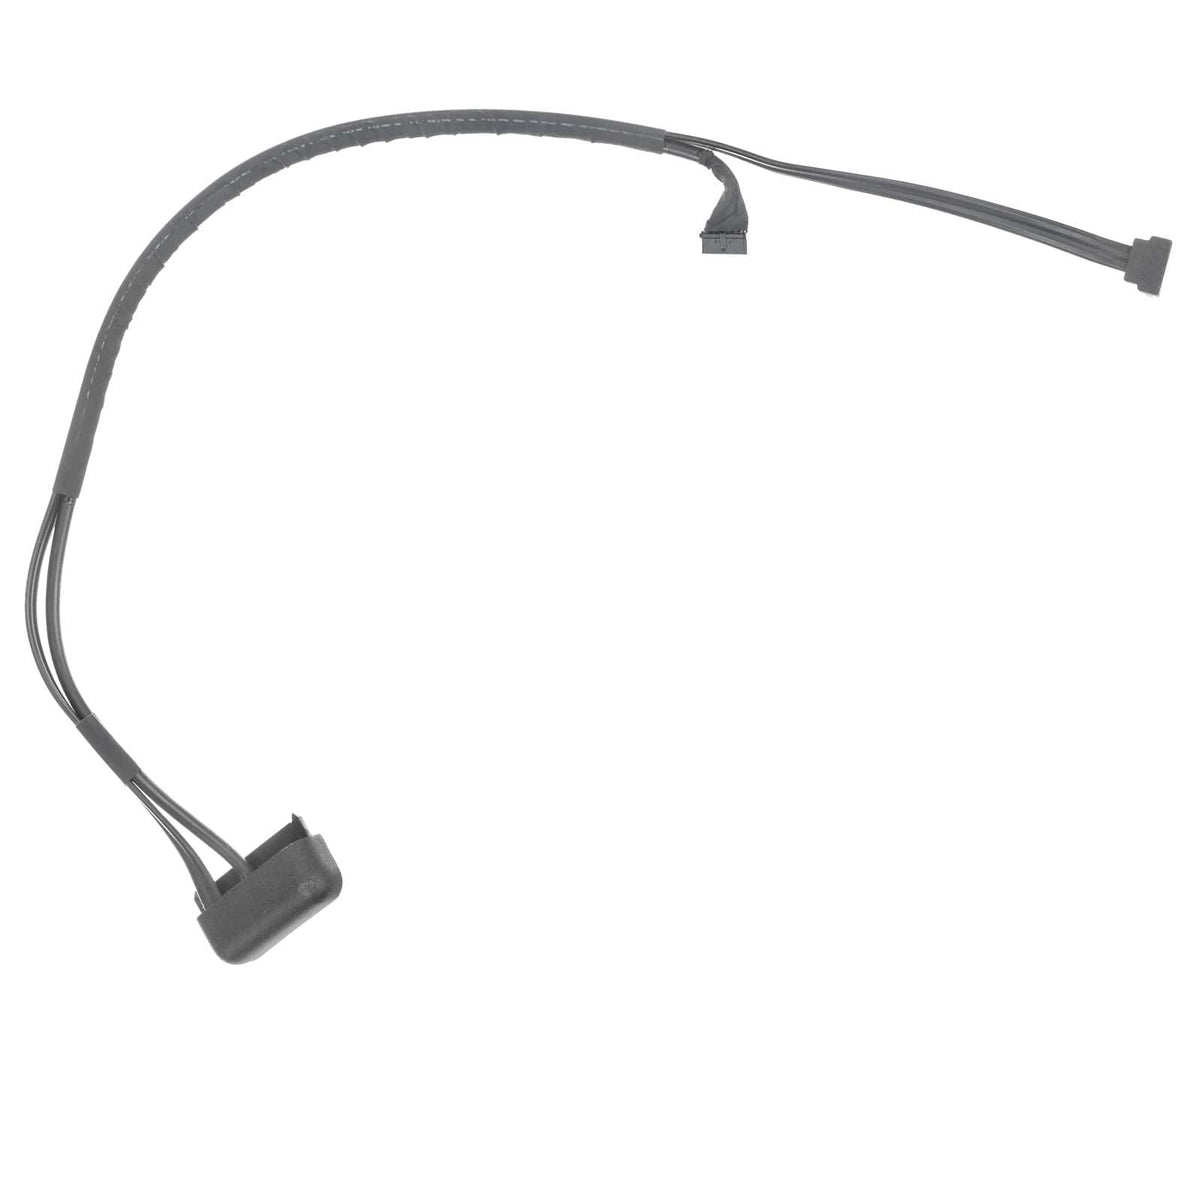 HARD DRIVE CABLE (HDC) FOR IMAC 27" A1419 (LATE 2014, MID 2015)